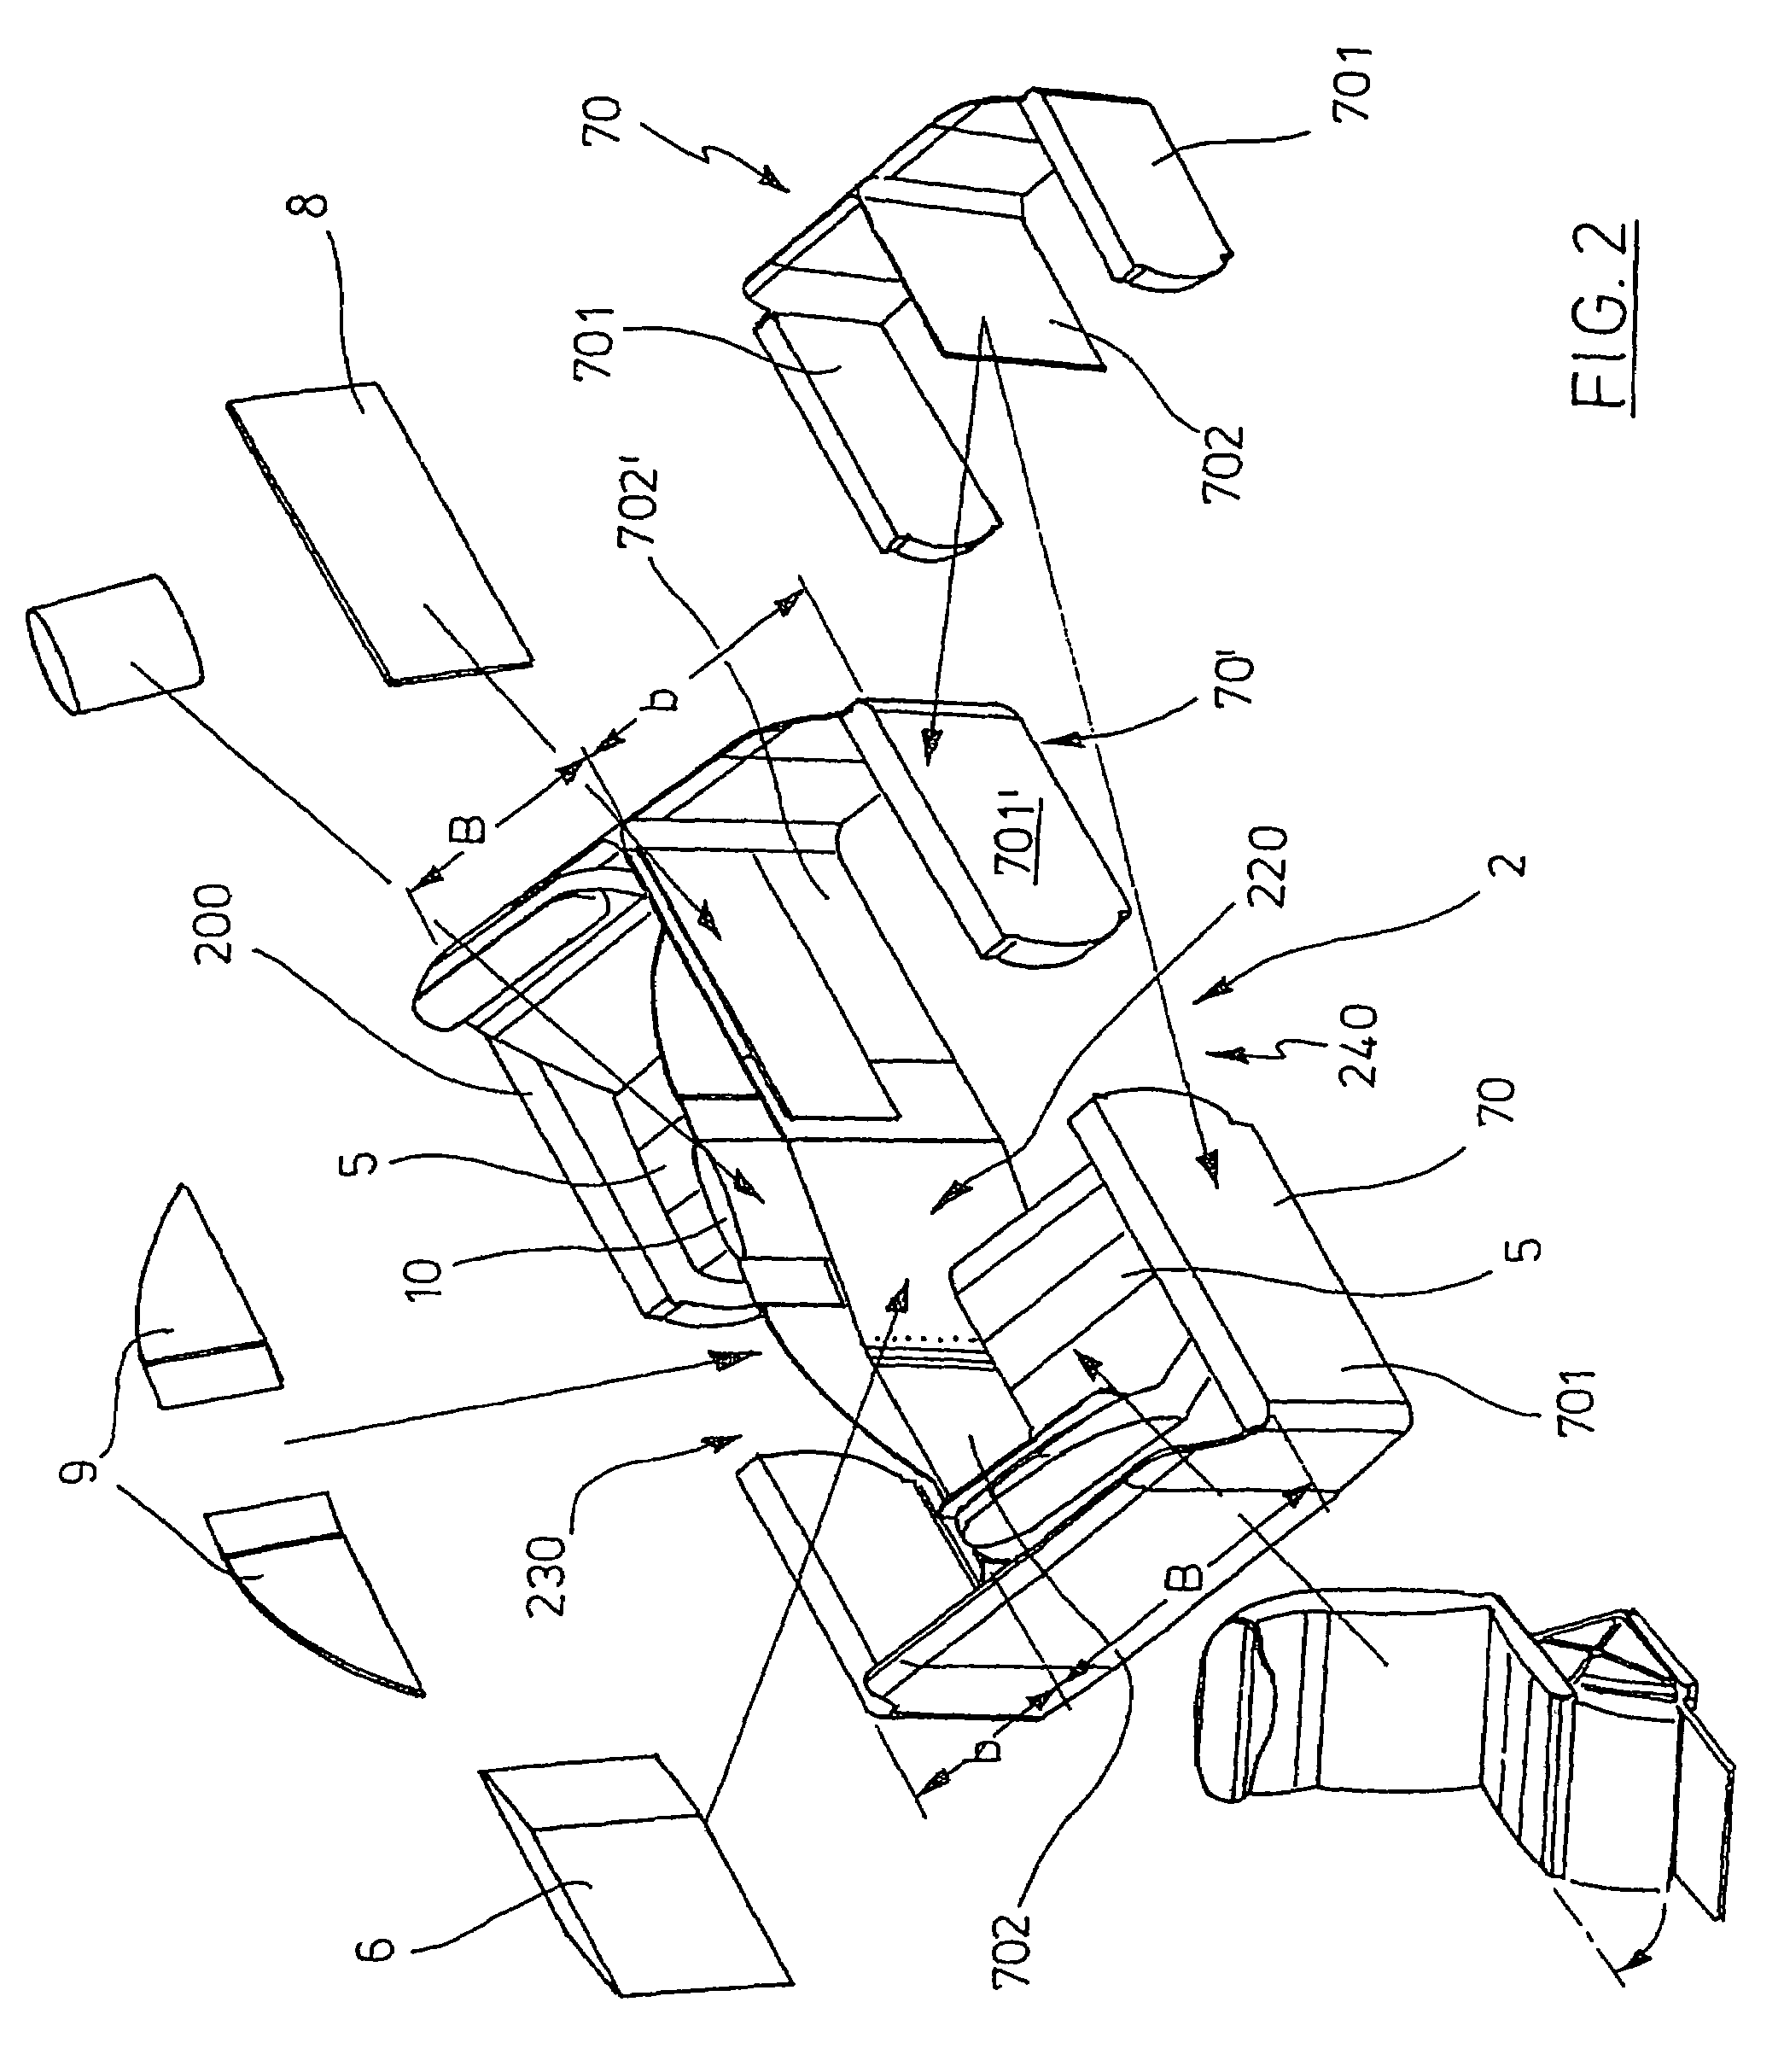 Passenger seat unit, in particular for commercial aircraft